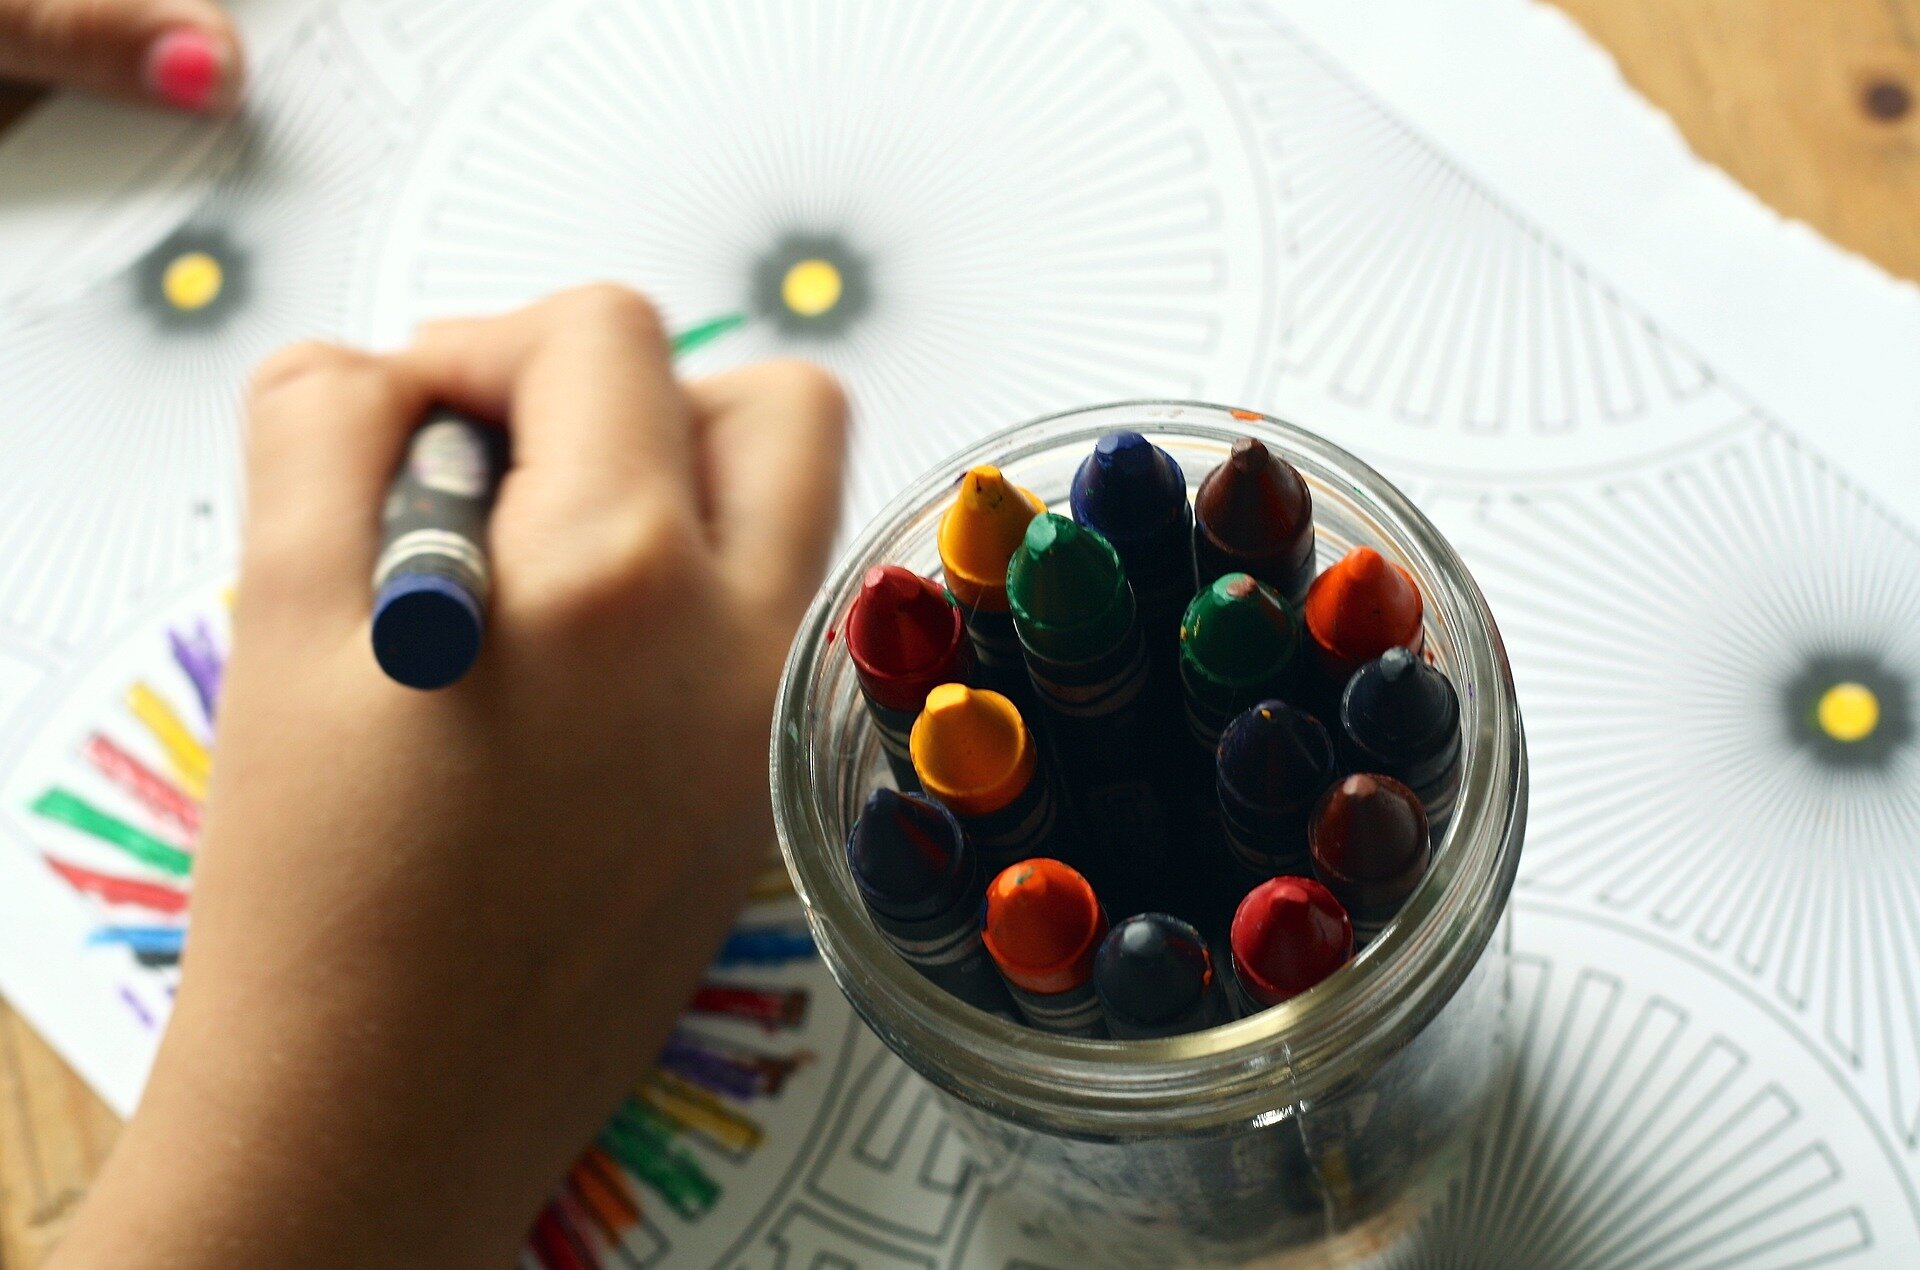 #Children’s drawings may help with early detection of giftedness